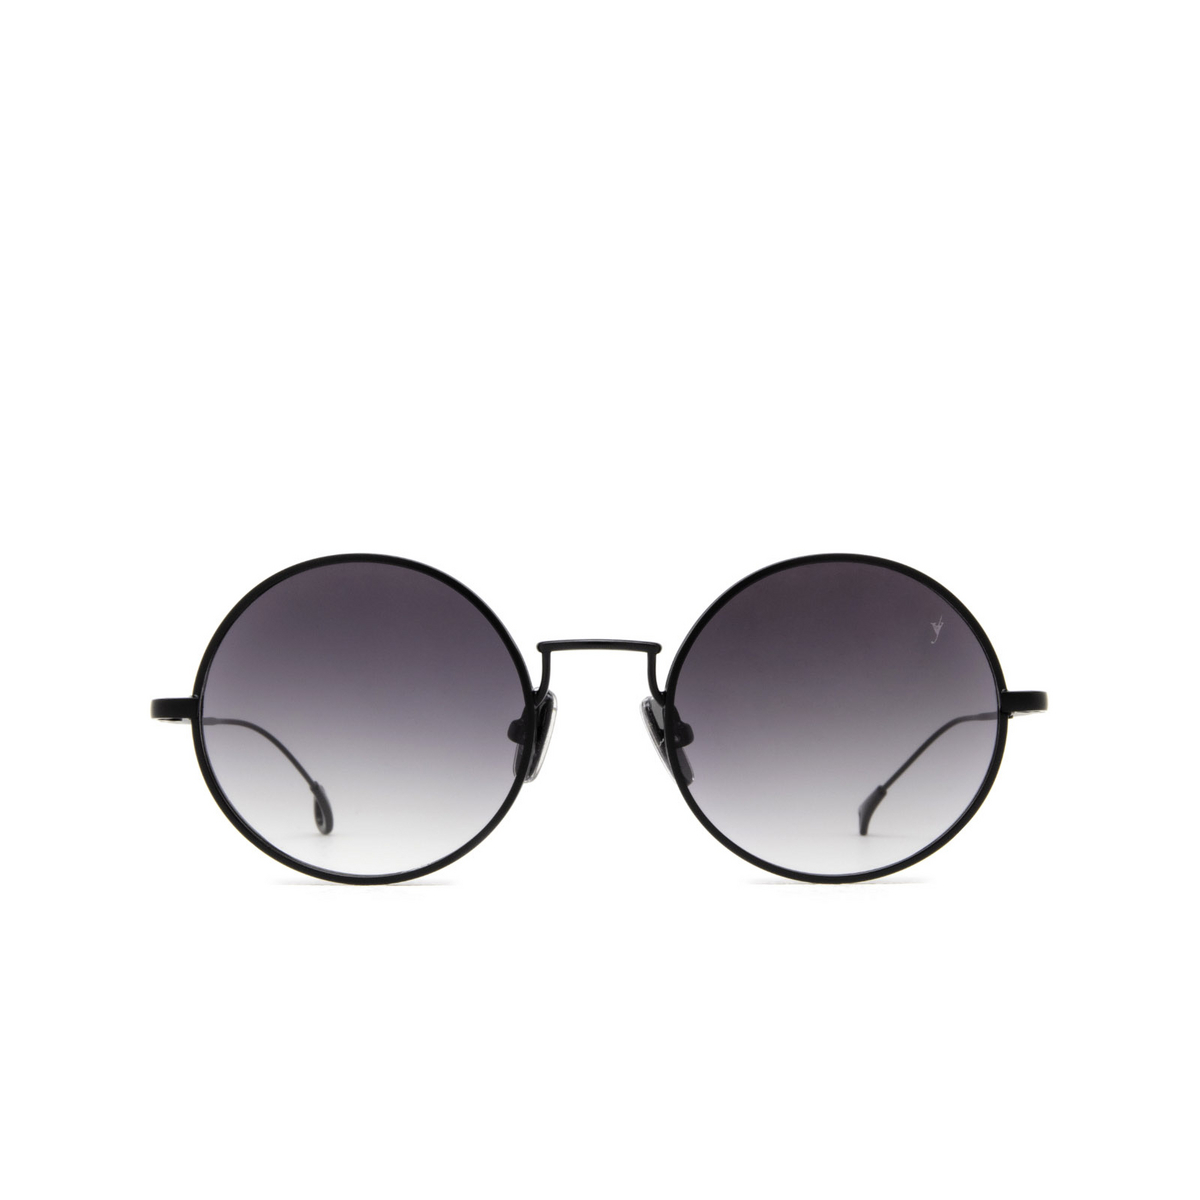 Eyepetizer® Round Sunglasses: William color Black C.6-27 - front view.